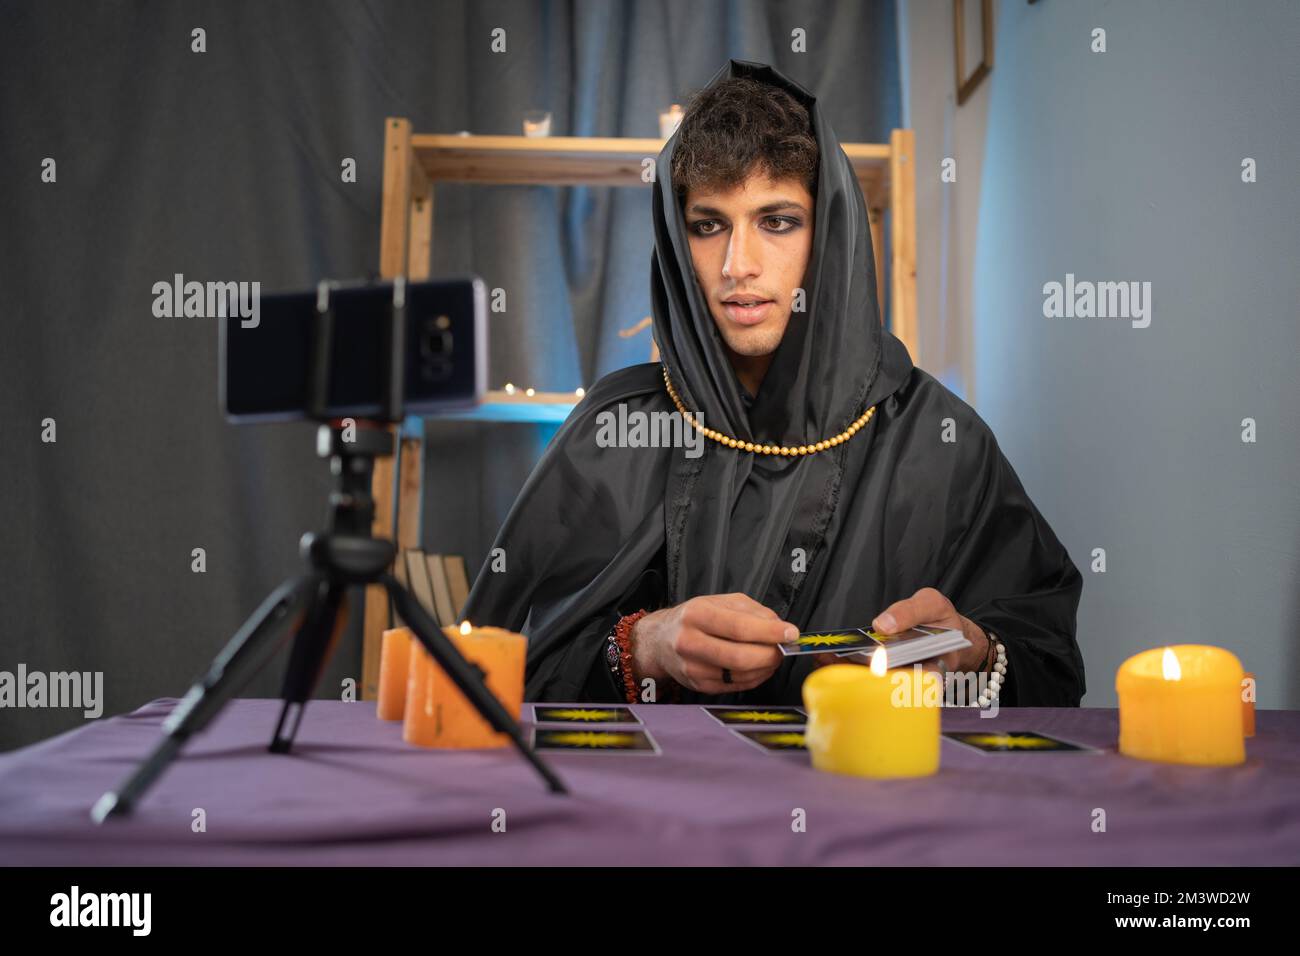 New service concept. Male fortune teller in magician costume reads tarot cards for predictions, telling customers using web cam by providing services Stock Photo